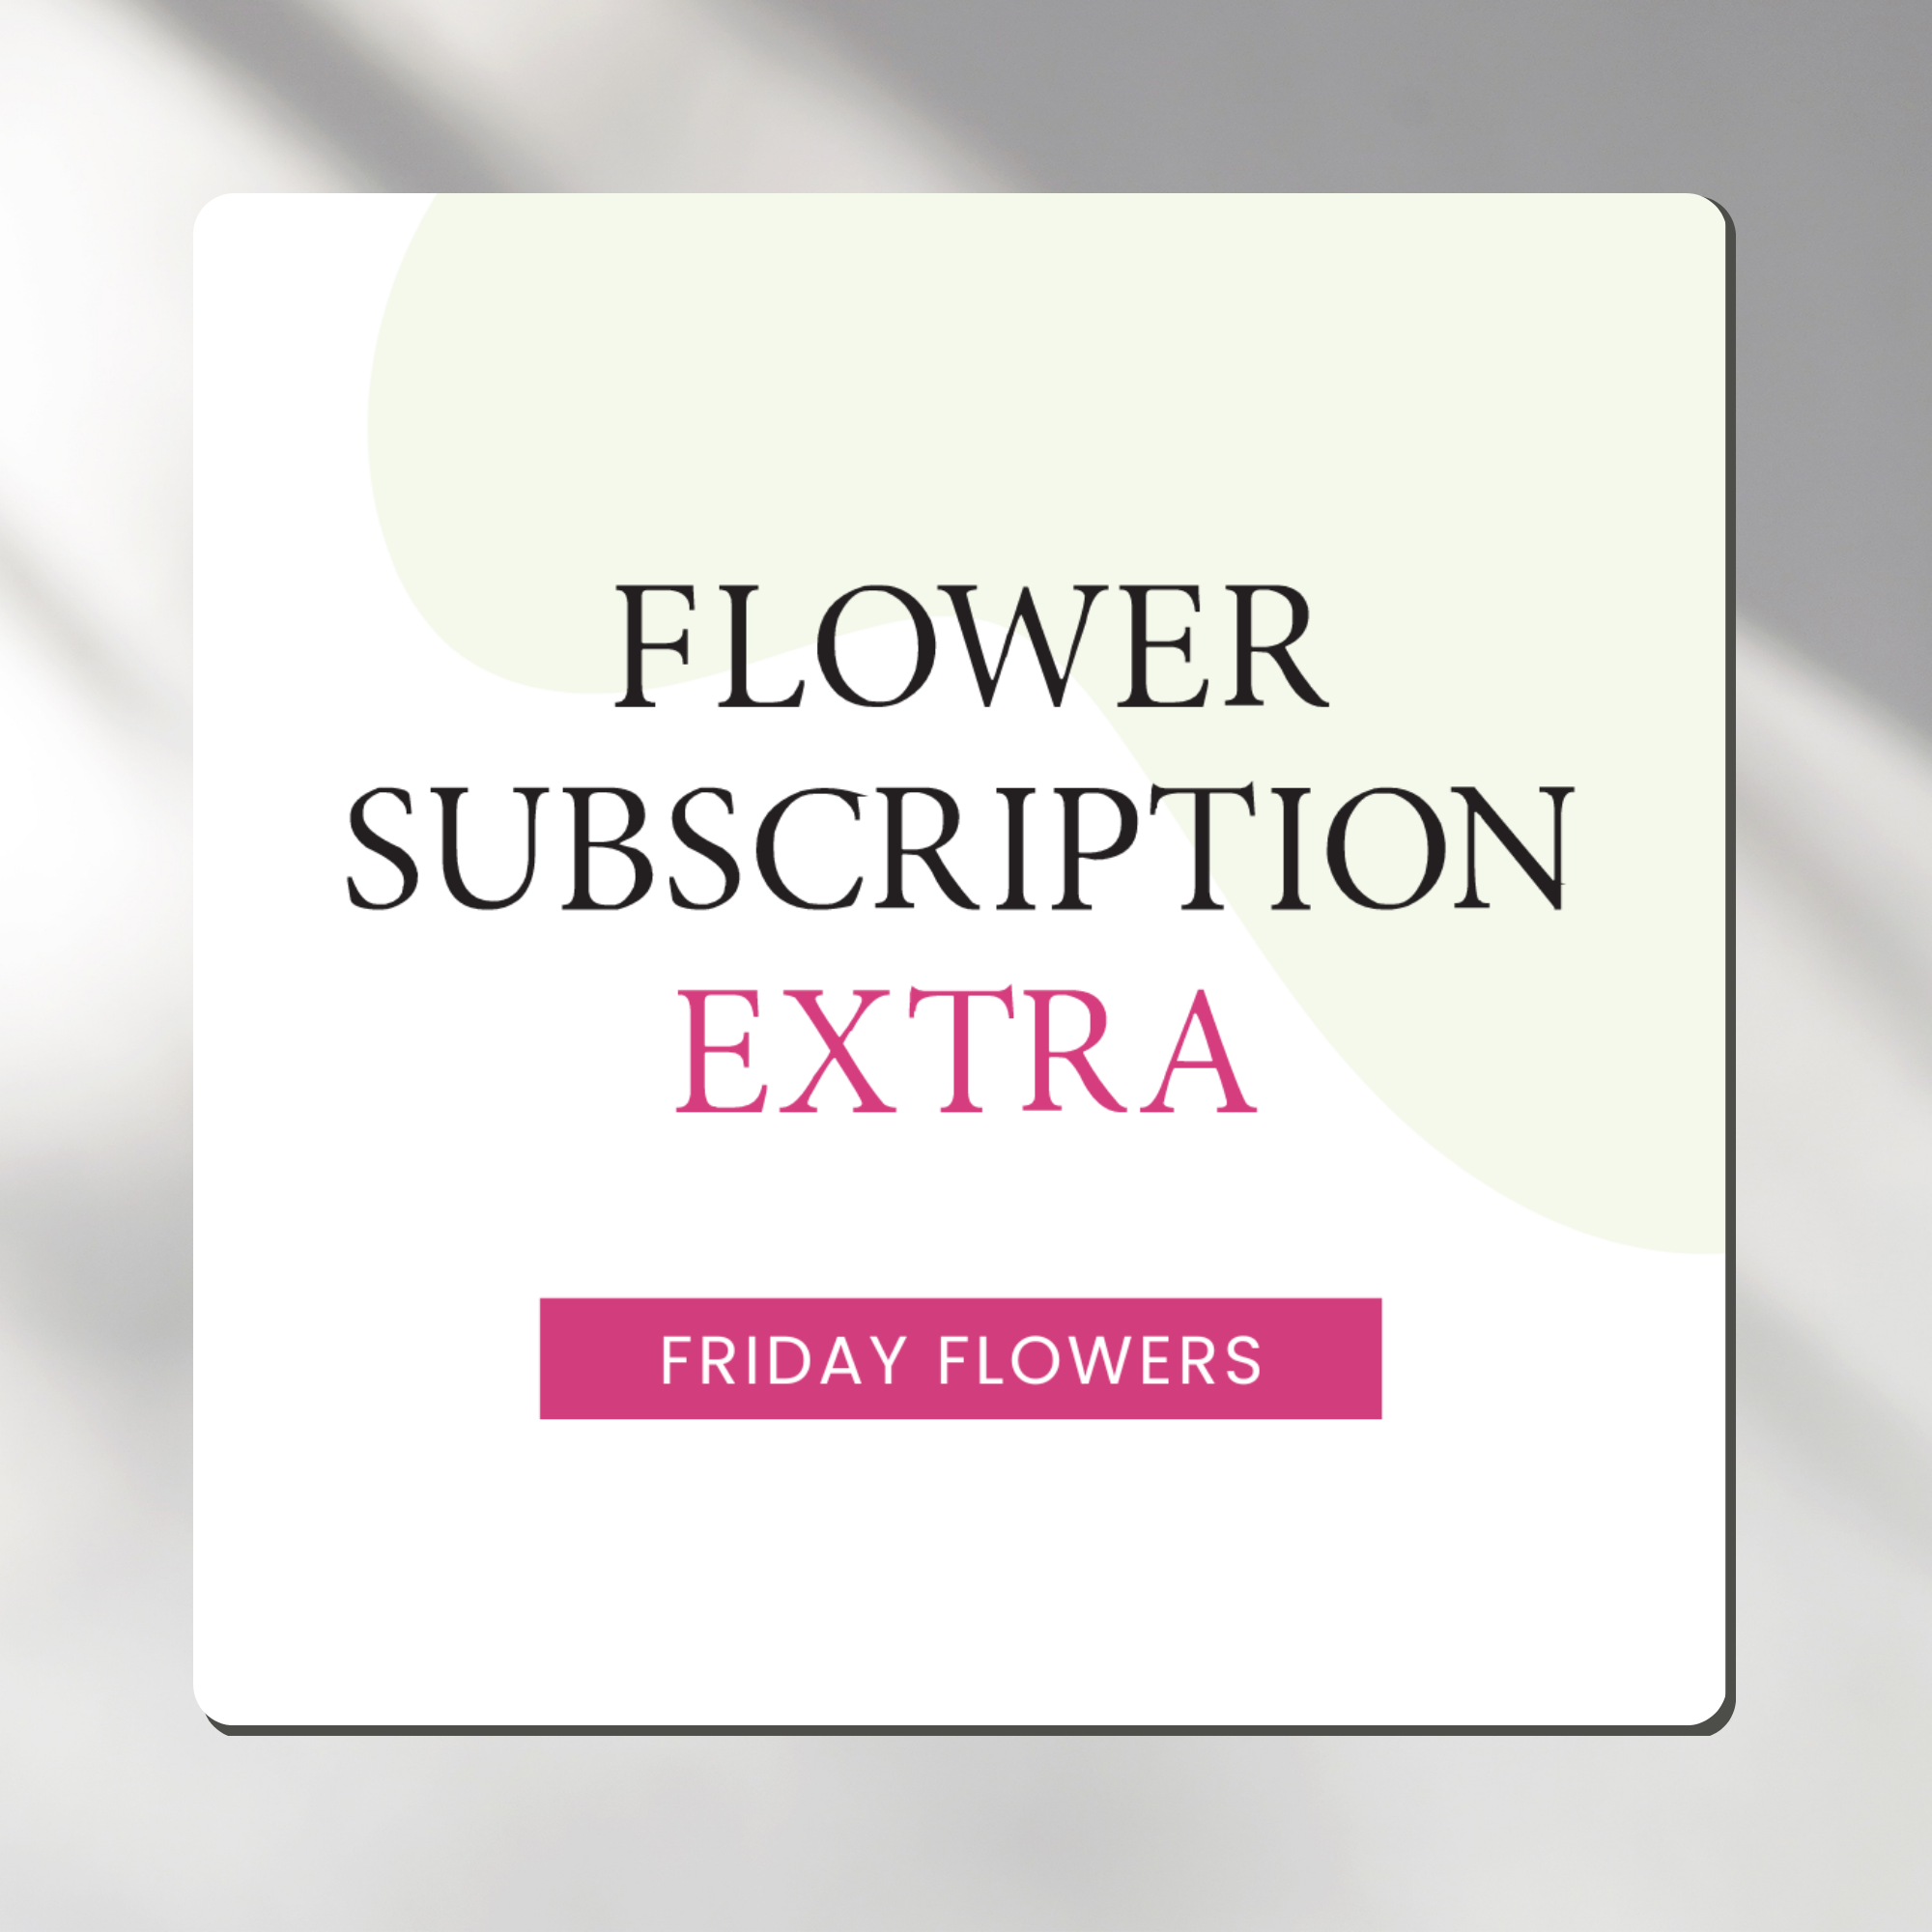 Flower Subscription Extra Friday